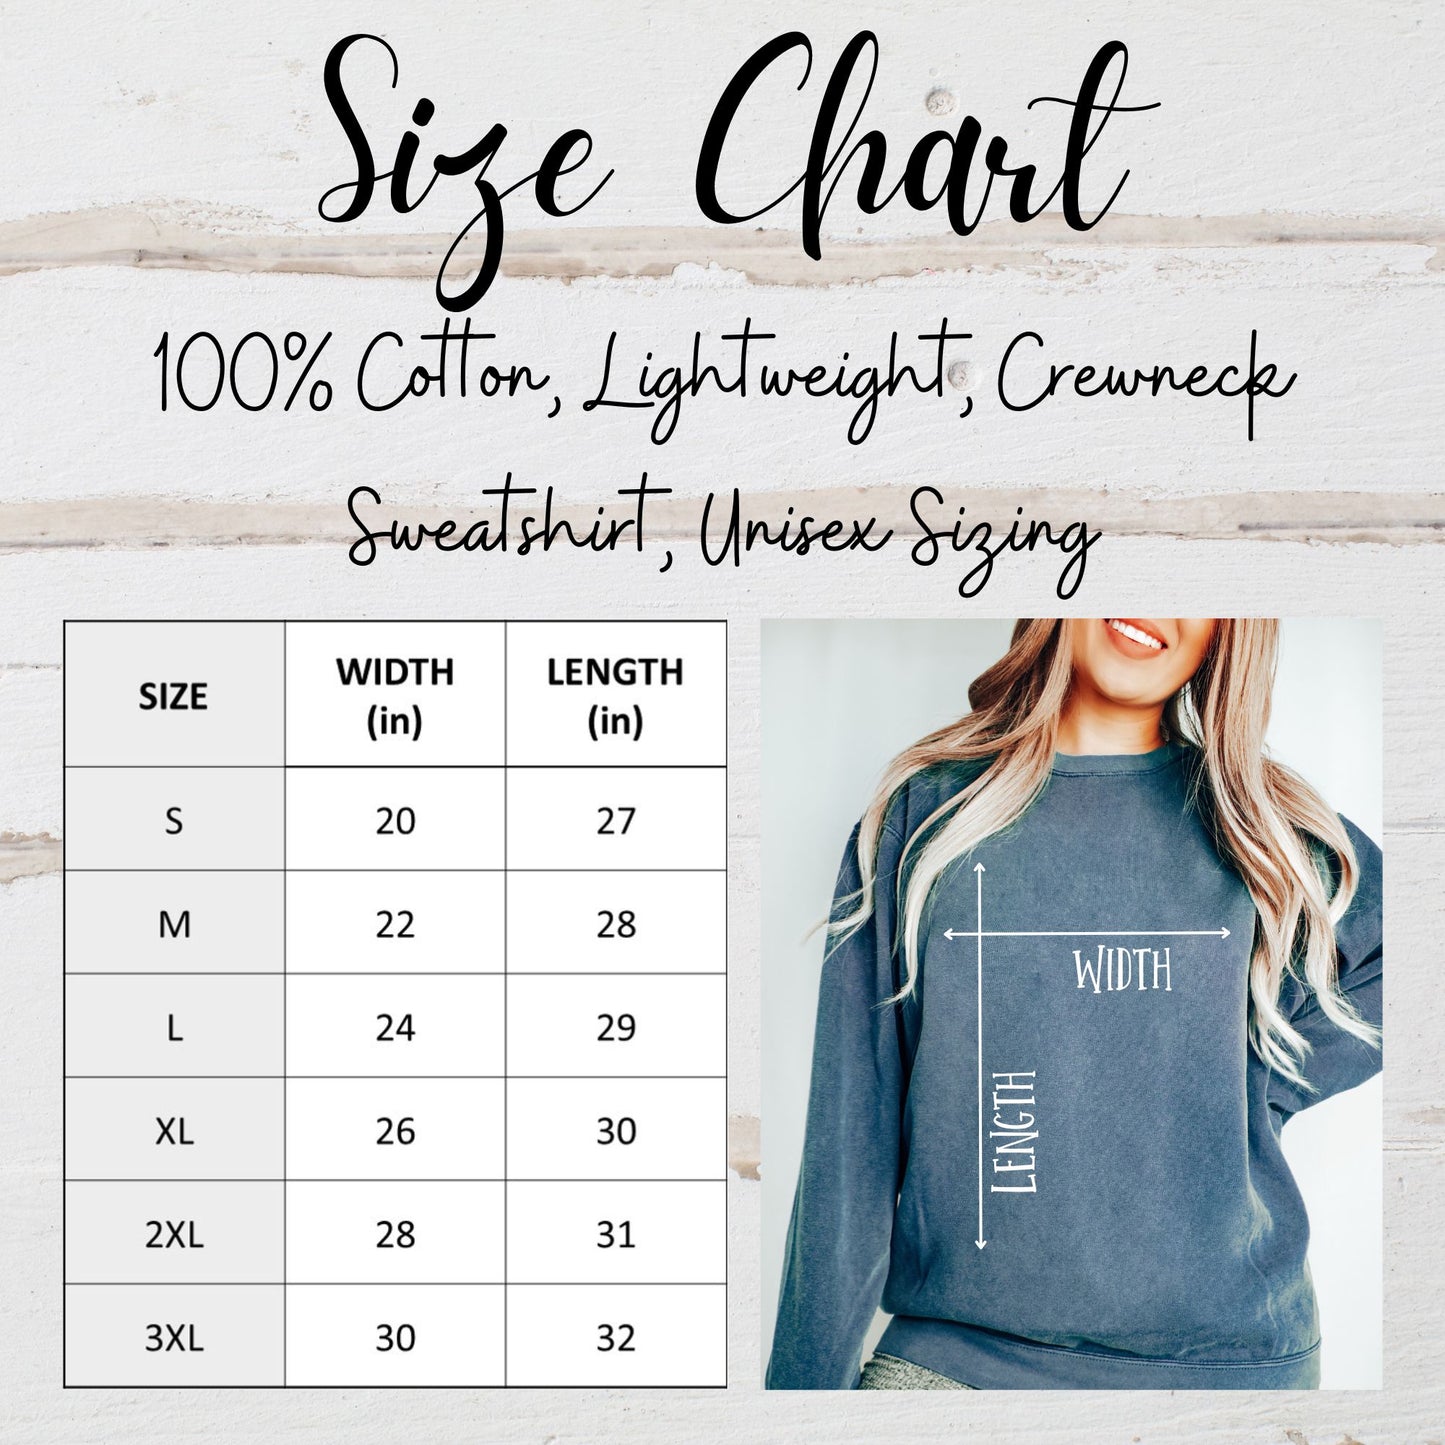 the size chart for a women's sweatshirt